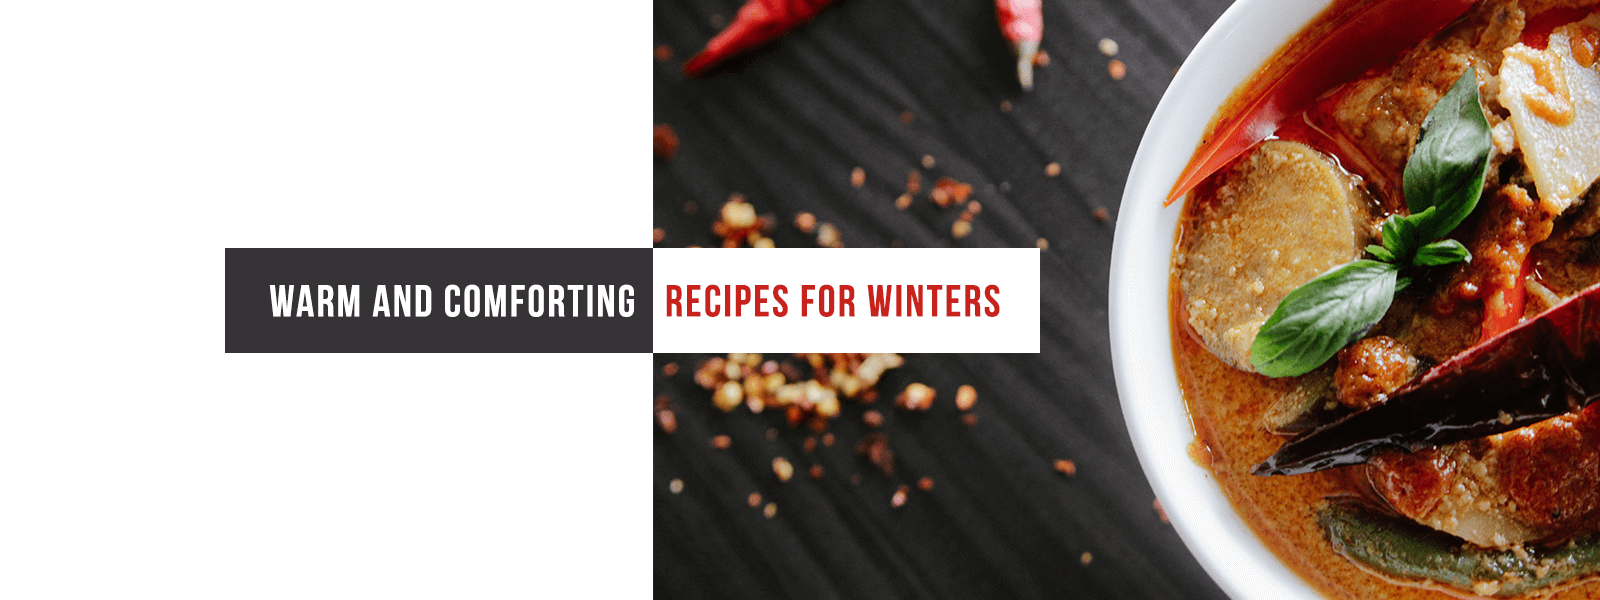 Easy Home-Made Recipes for Chilly Winter Days